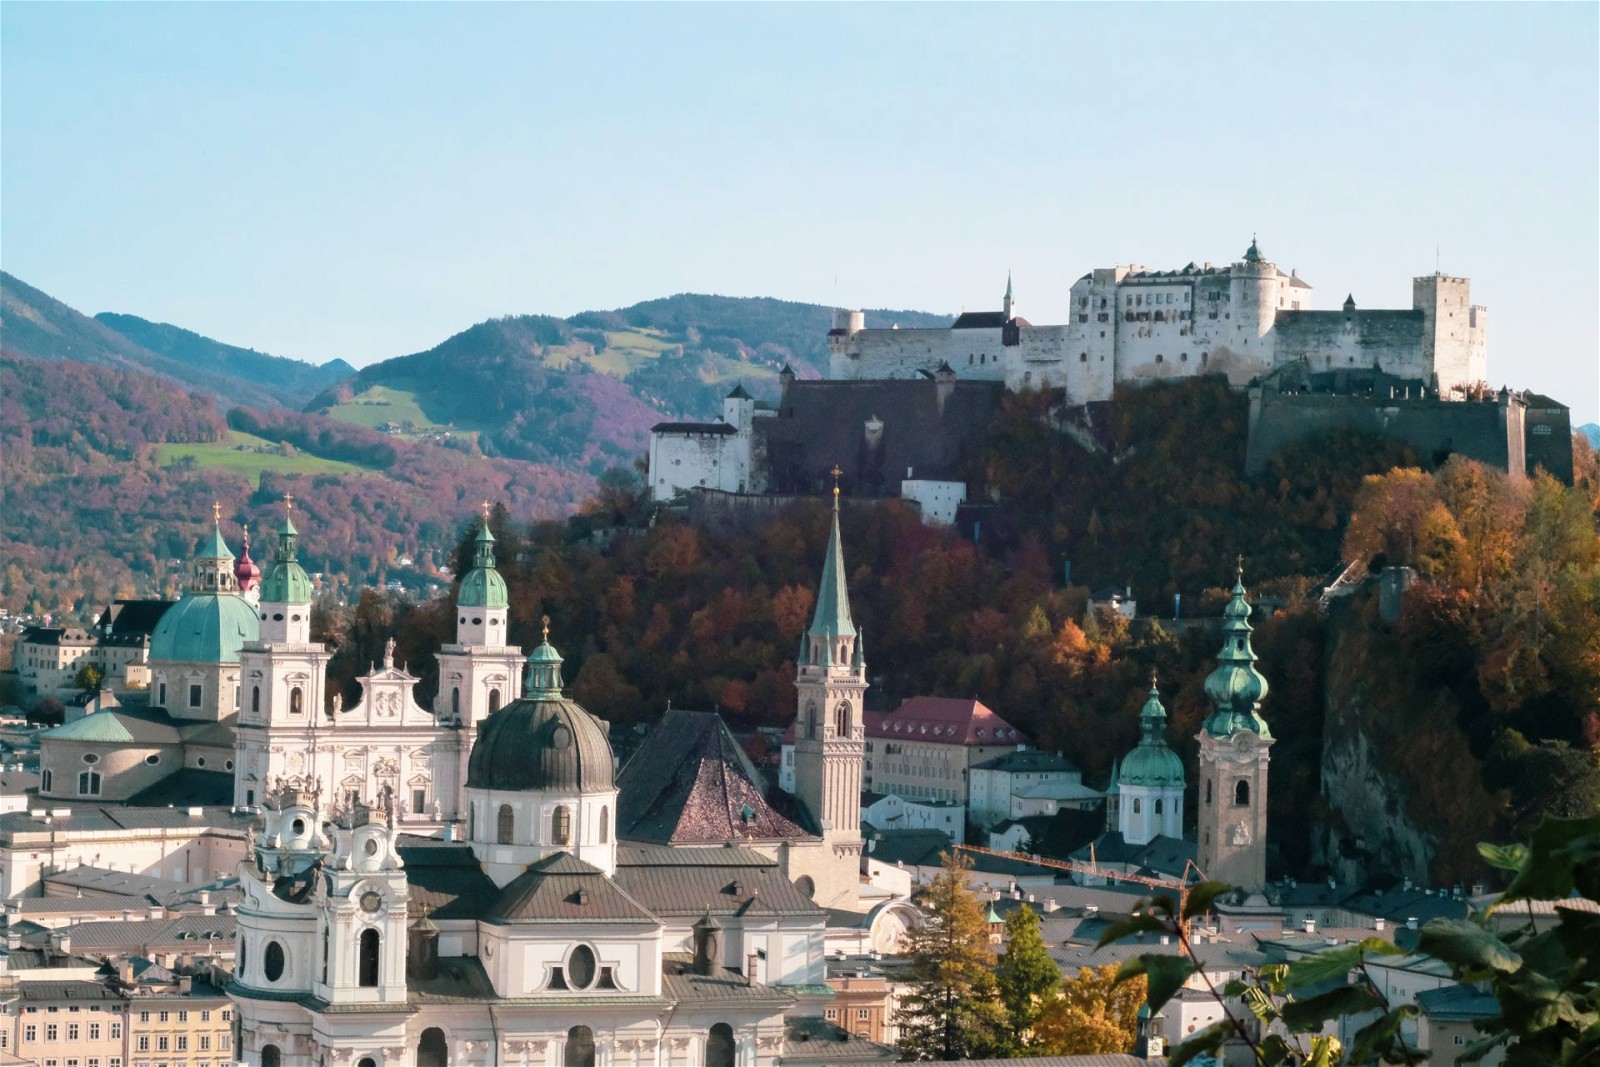 Salzburg boasts numerous attractions that showcase its cultural and architectural wonders.